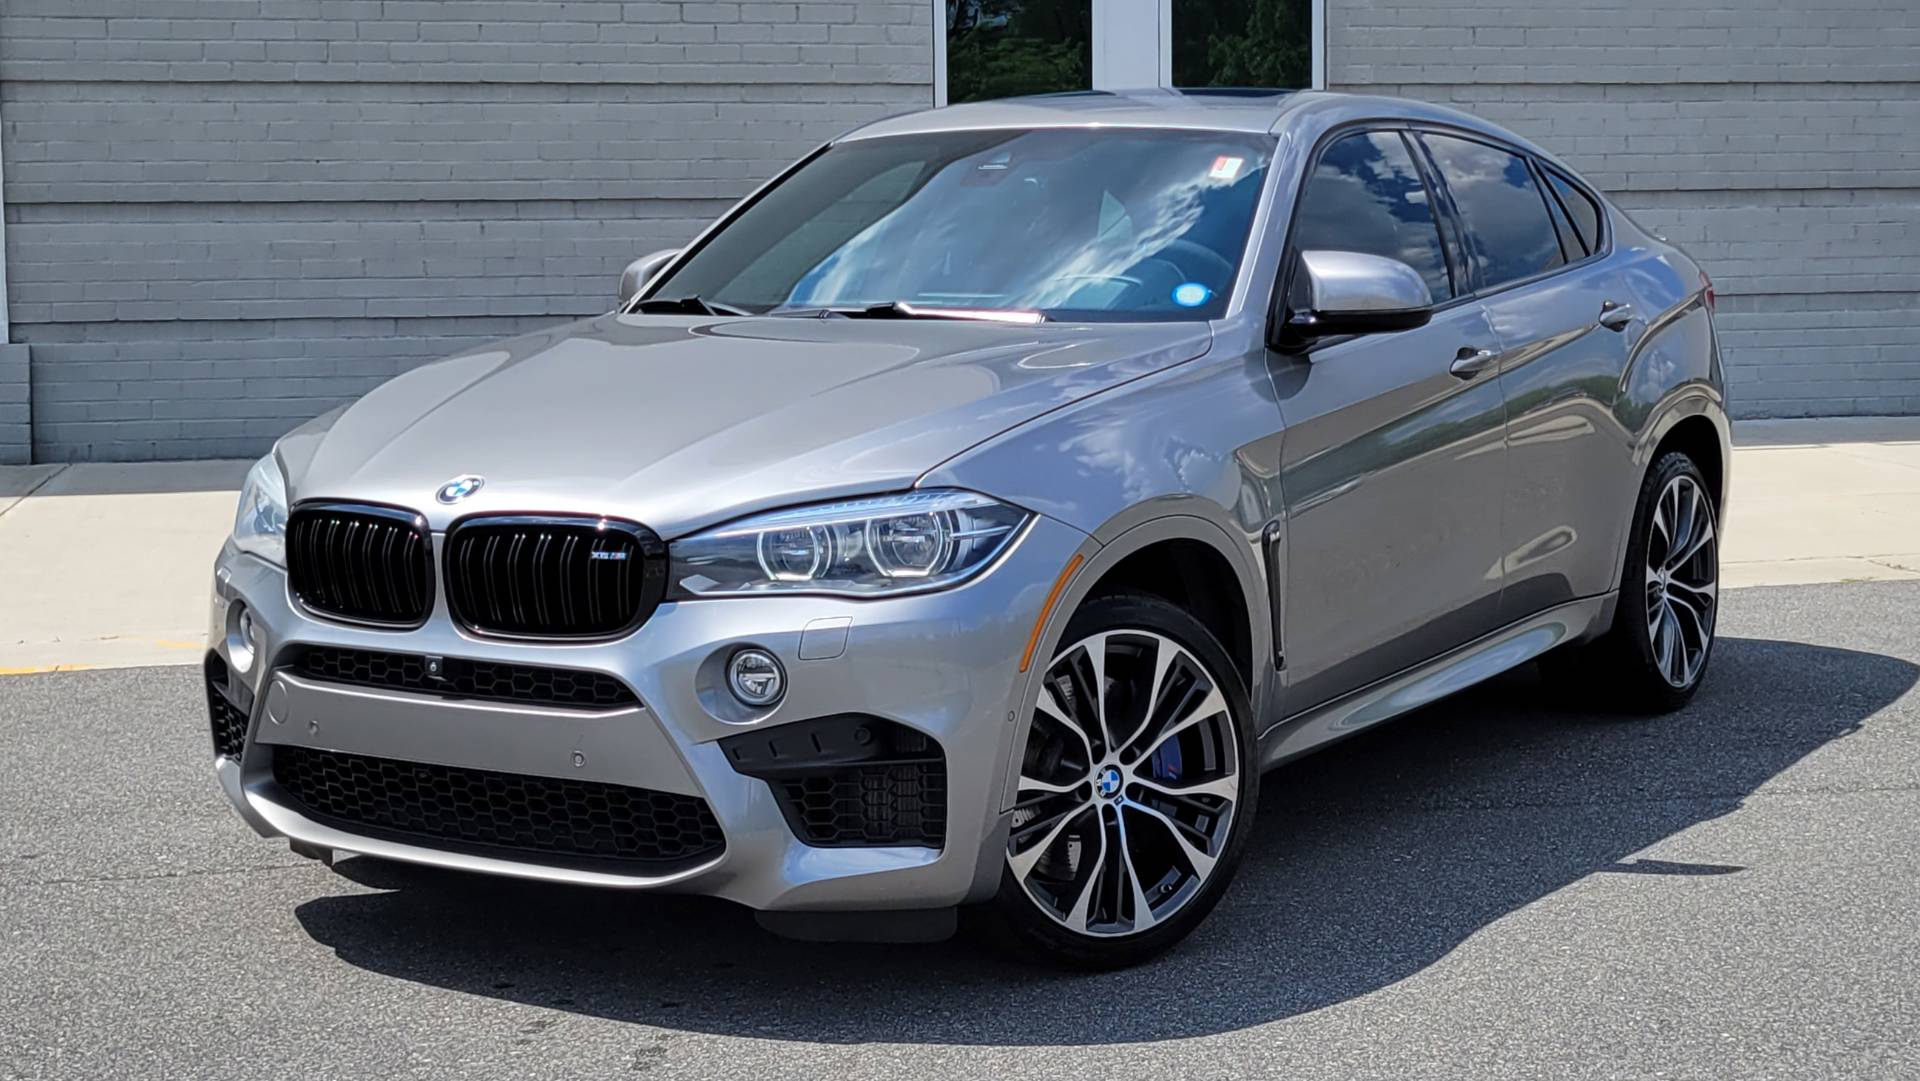 Used 2016 BMW X6 M 567HP / EXECUTIVE / DRVR ASST / PARK ASST / NAV / SUNROOF / CAMERA for sale $49,995 at Formula Imports in Charlotte NC 28227 1